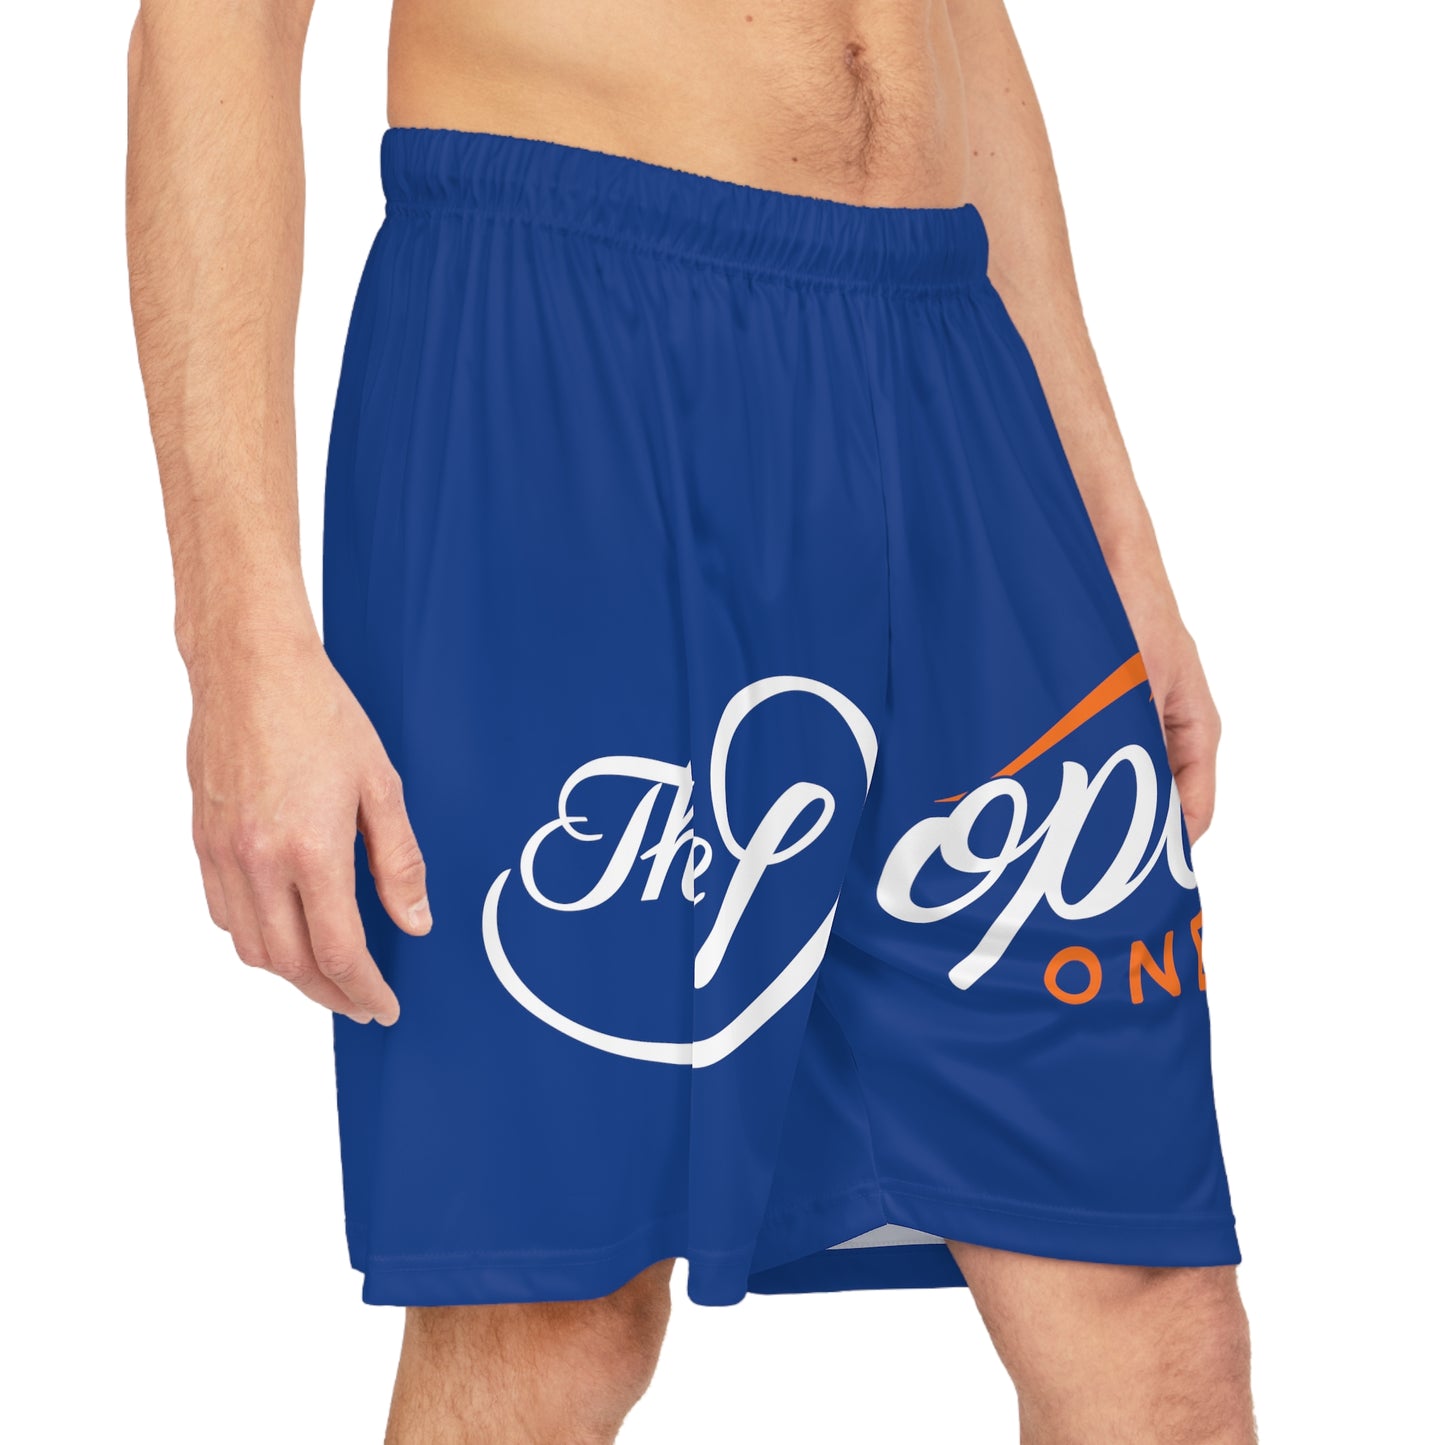 theDopeOnes Finals Shorts (Knicks)